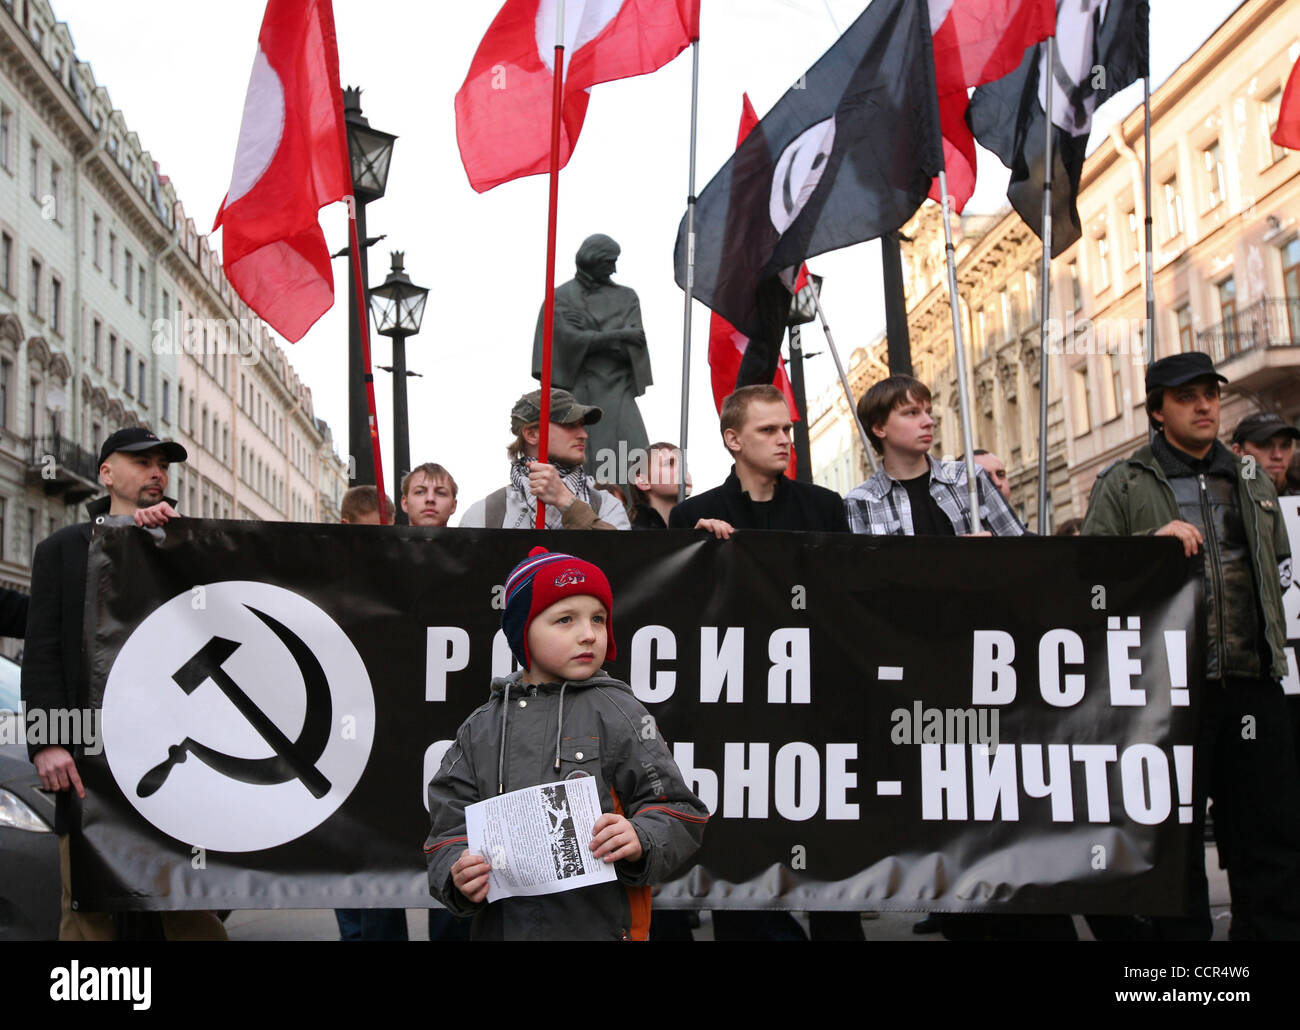 Russian nationalists of the forbidden National Bolshevik party (NBP)with their flags and symbolics at a protest rally in St.Petersburg. Russian radical nationalists protested against NATO . The rally was held under nationalistic slogan (on the placard) of : `Russia Above All, All the Rest is Nothing Stock Photo